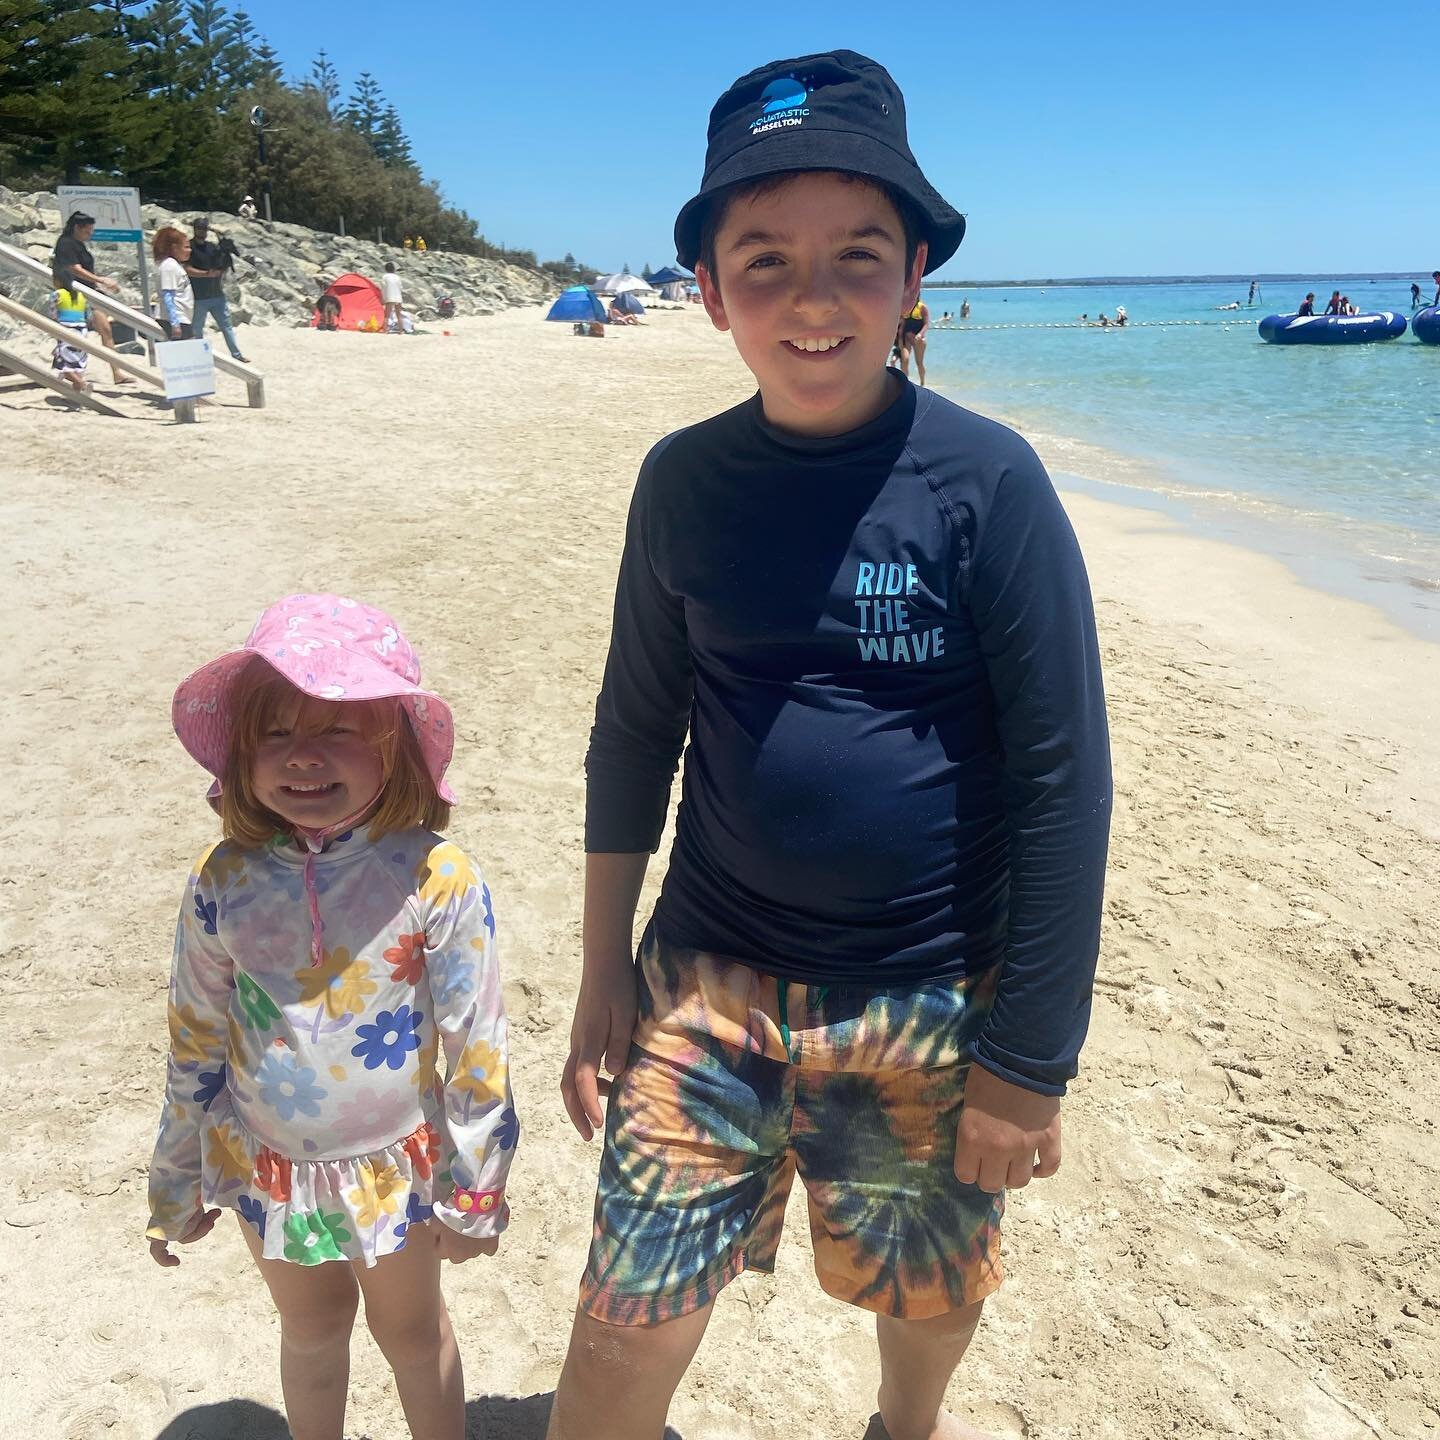 Some happy customers with their new Aquatastic hats! We have sizes for everyone, stay sun safe on the beach and grab yourself a hat for just $15 ☀️👌🏖👒